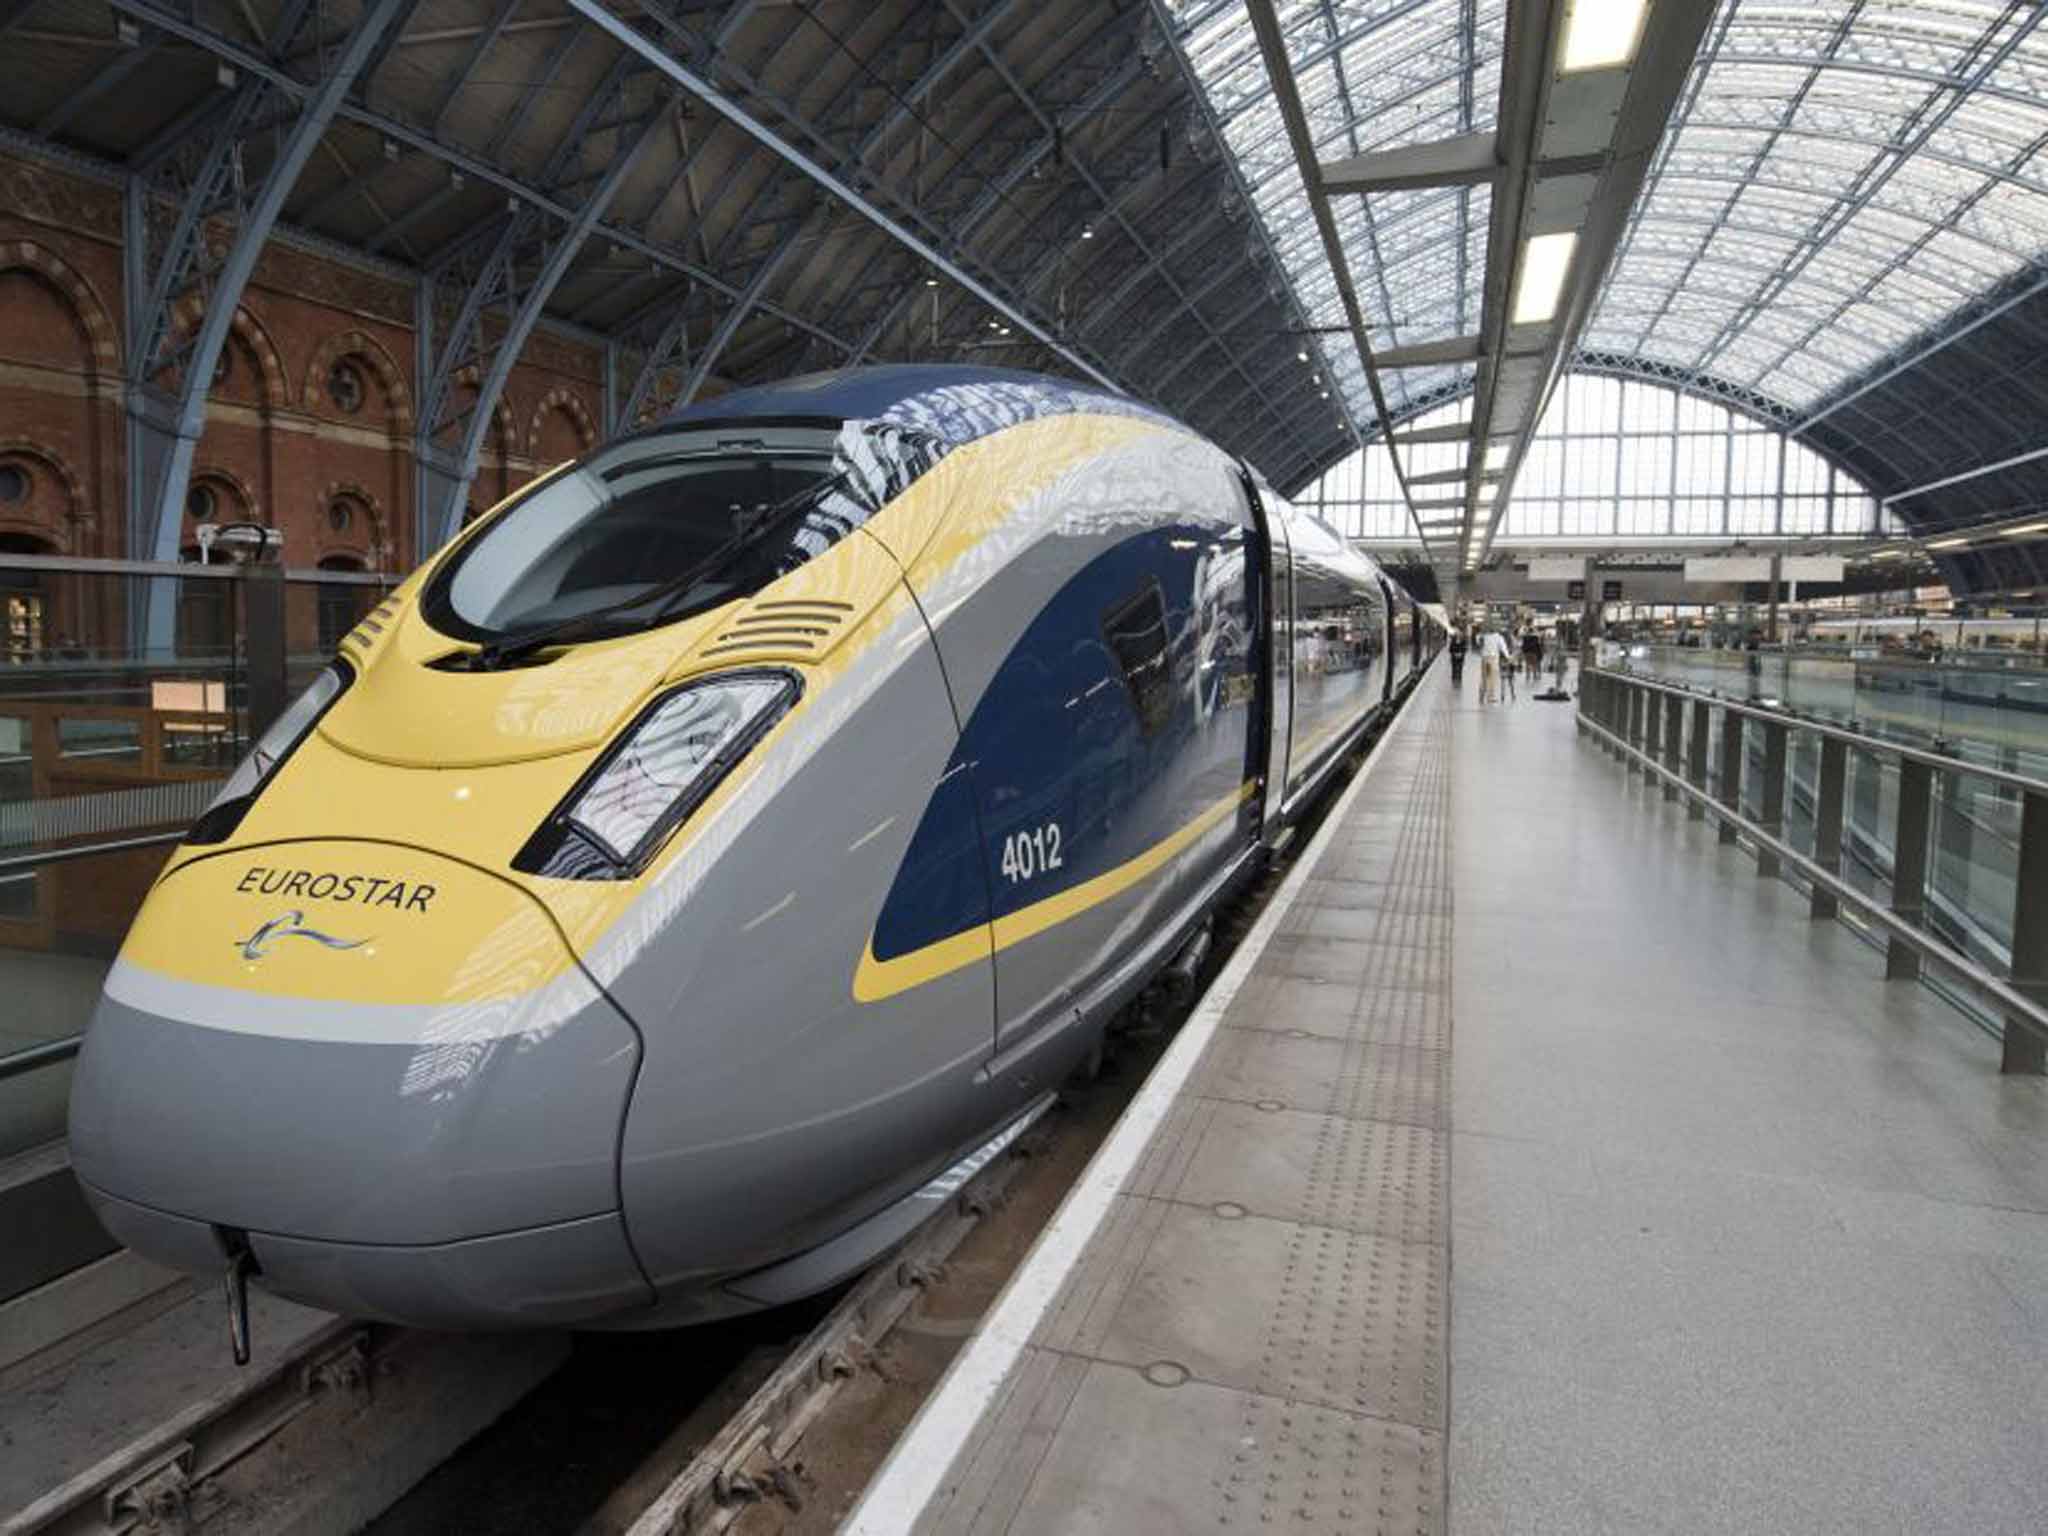 Eurostar passengers' journeys were disrupted by a fire in the Channel Tunnel